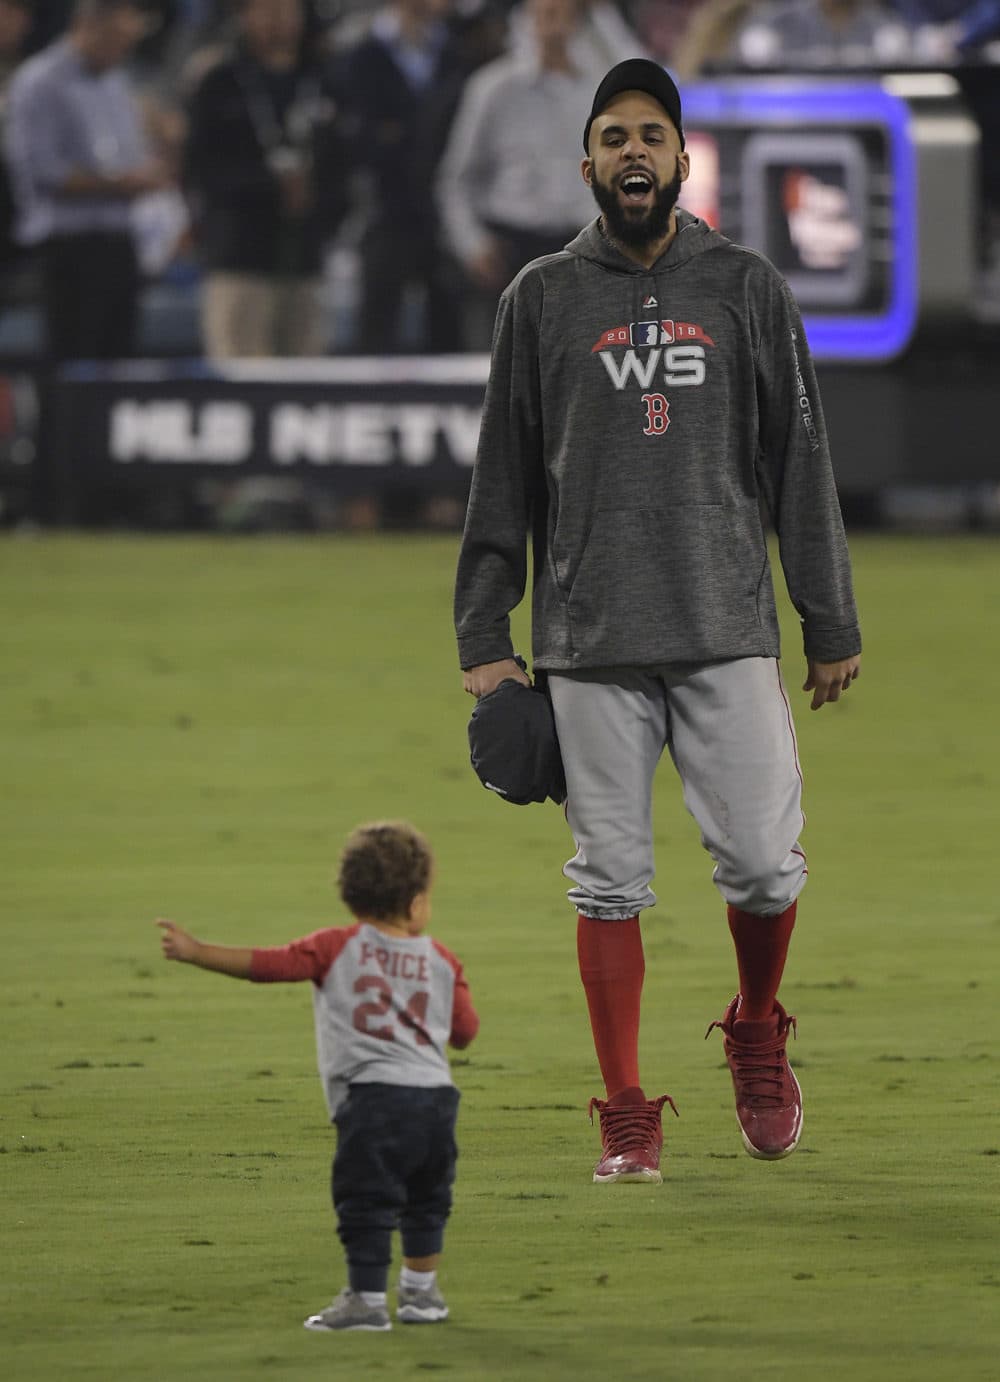 Boston Red Sox pitcher David Price celebrates with his son Xavier after Game 5 of baseball's World Series against the Los Angeles Dodgers. (Mark J. Terrill/AP)